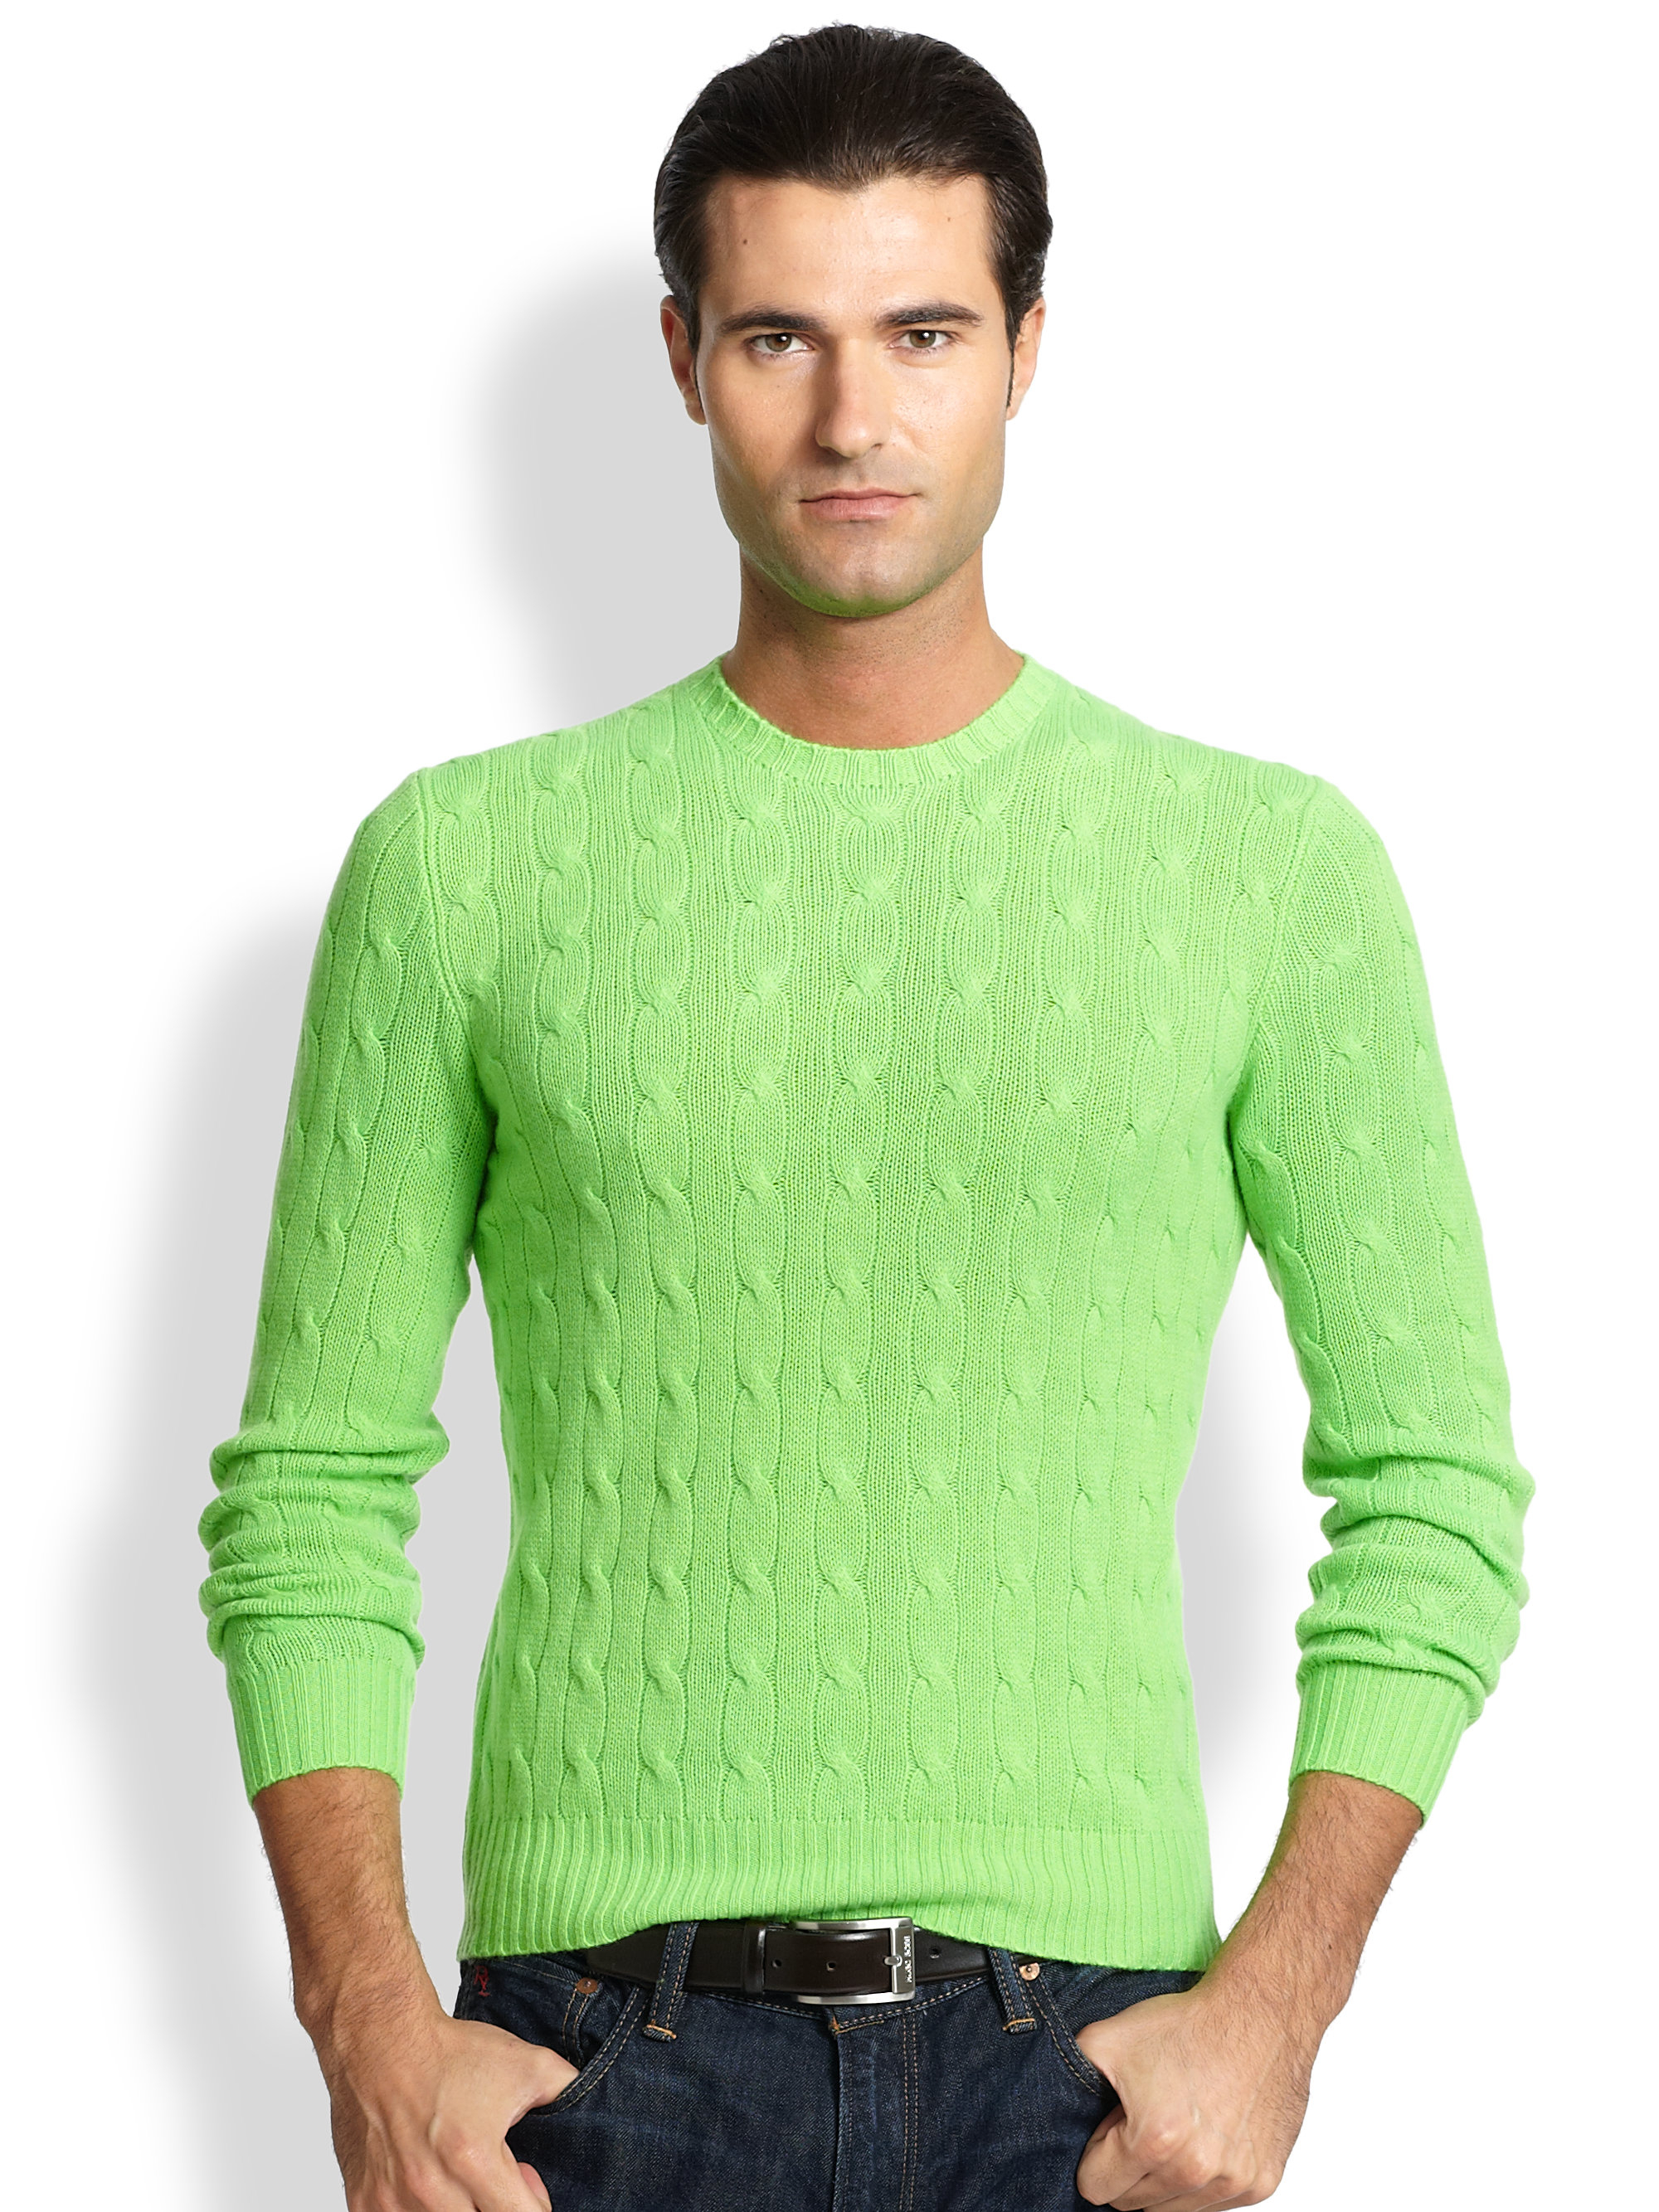 Lyst - Polo Ralph Lauren Cable-knit Cashmere Sweater in Green for Men